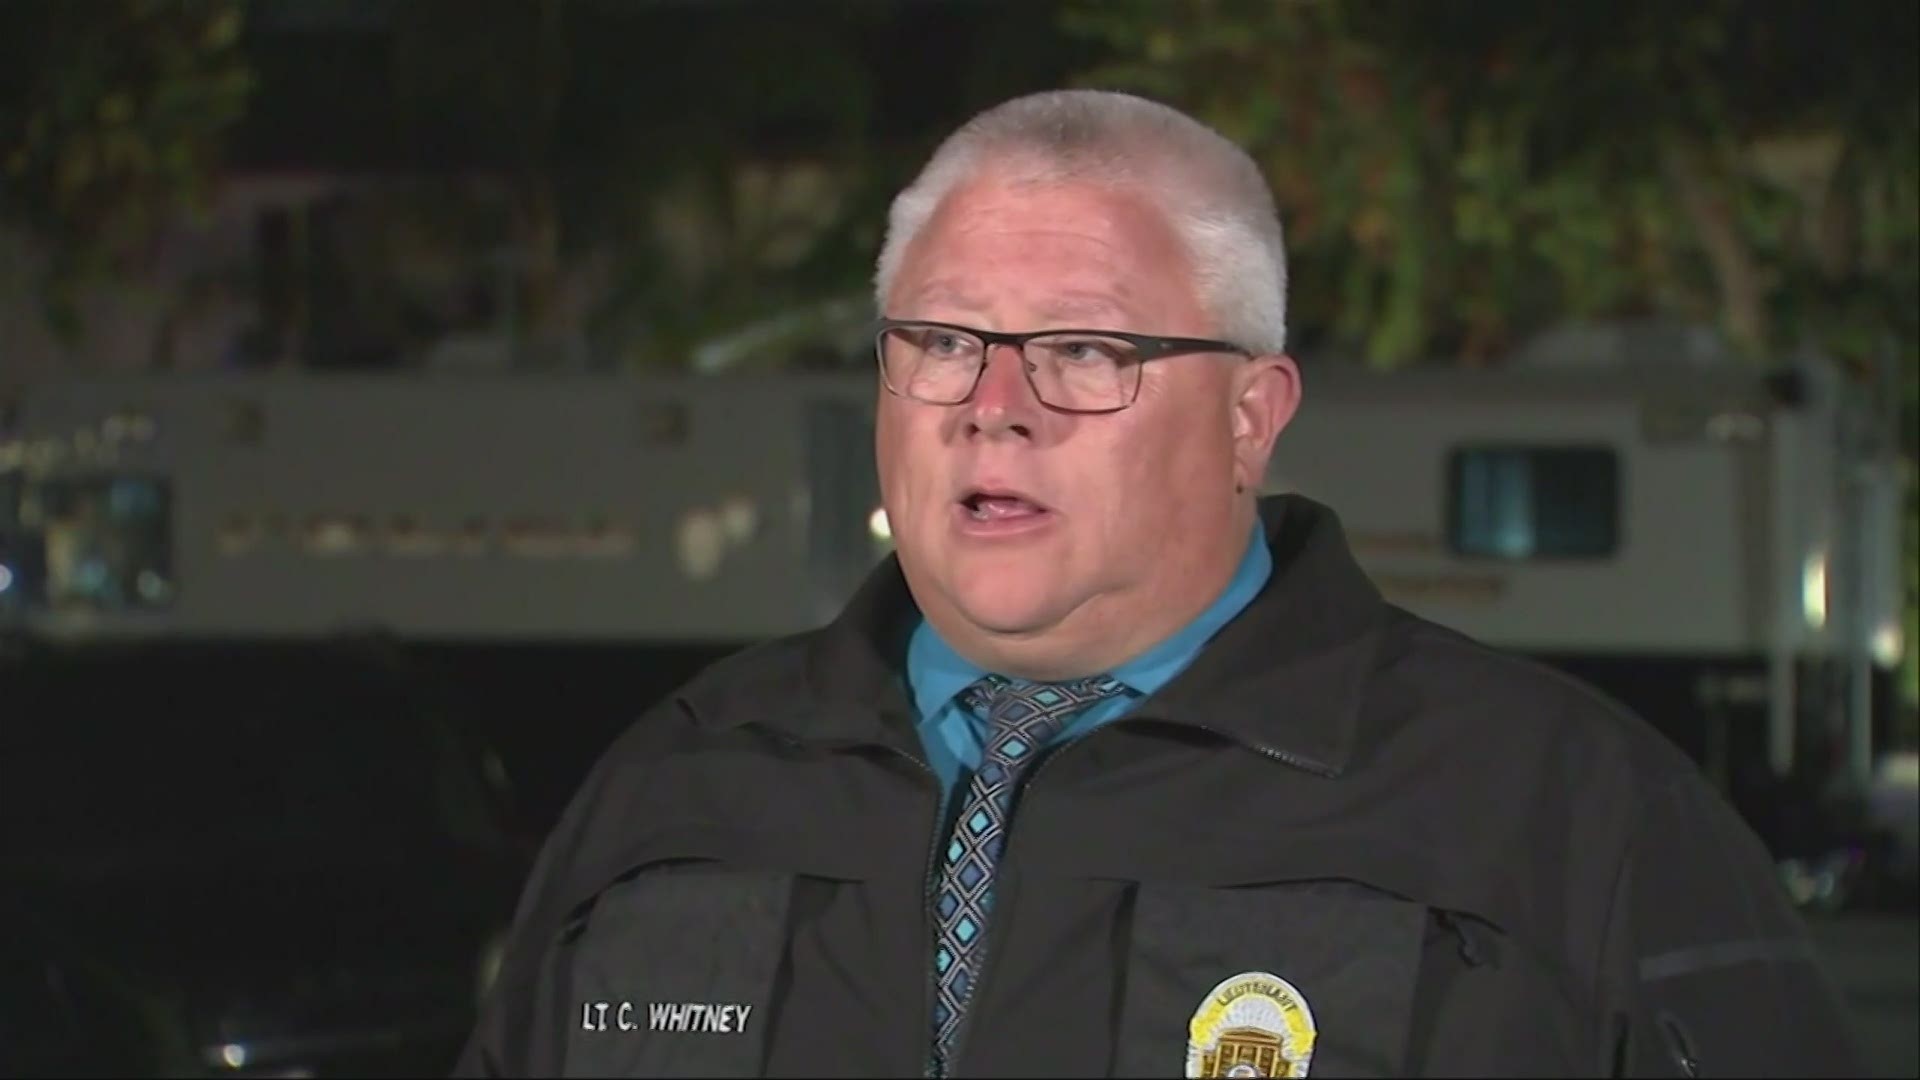 A man who was 'full of anger' stabbed, slashed and robbed his way across two Southern California cities in a rampage that killed four people and wounded two others who were apparently targeted at random, authorities said. (Video: KABC via AP)